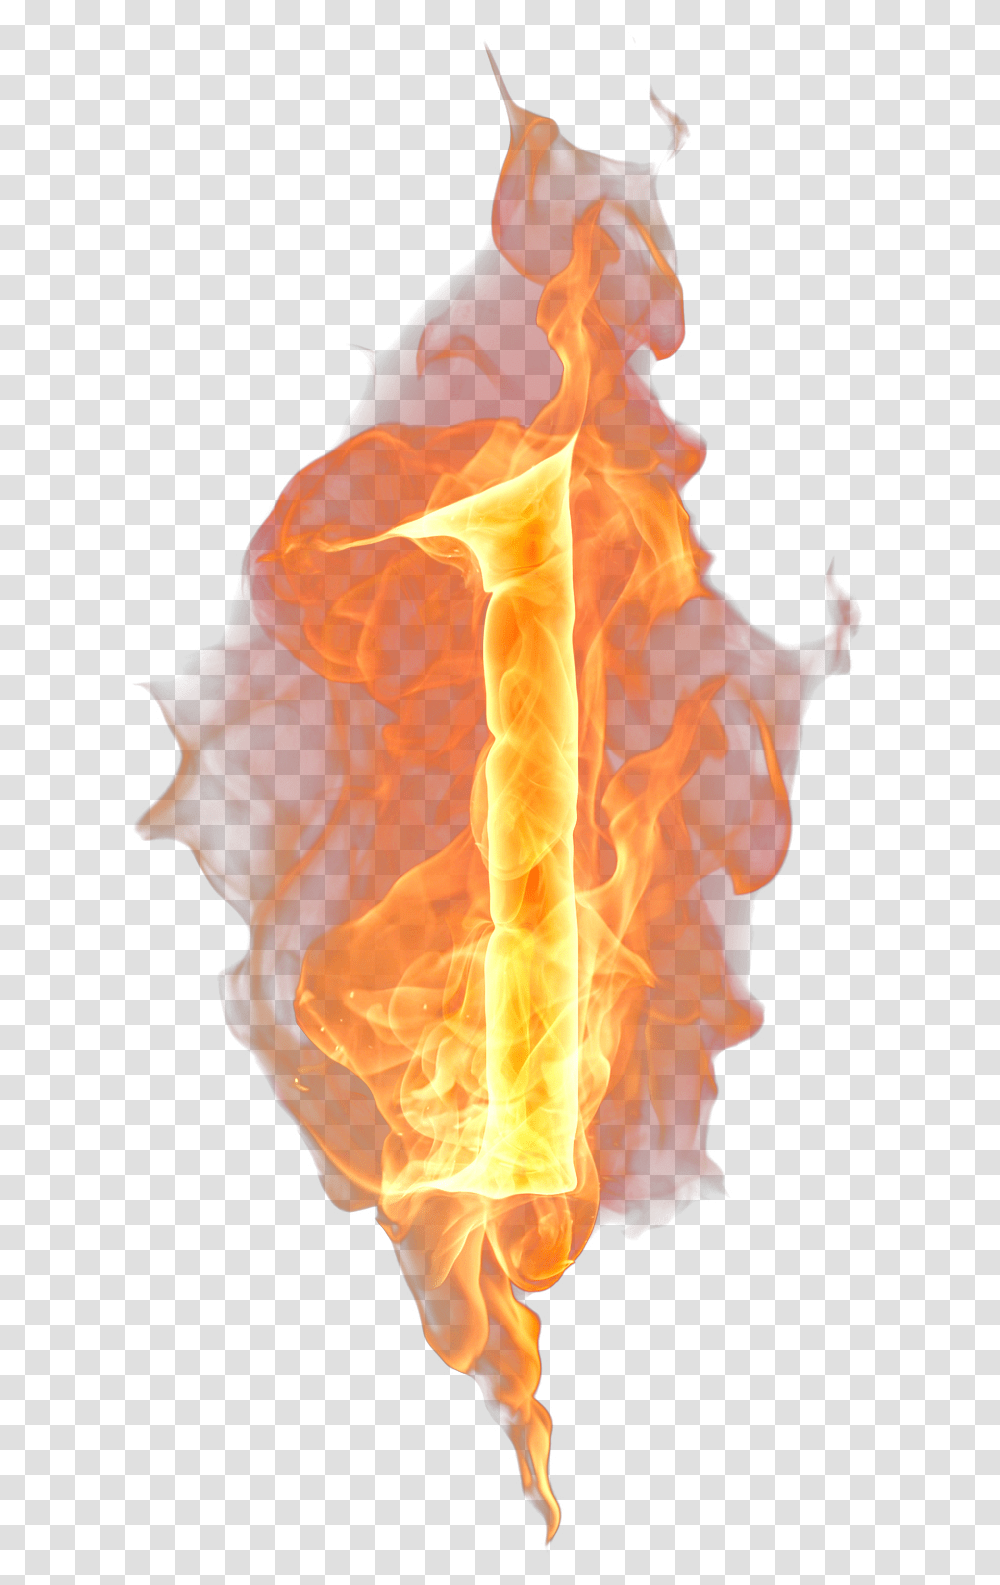 Number Free Image Number And Flame, Fire, Person, Human, Bonfire Transparent Png